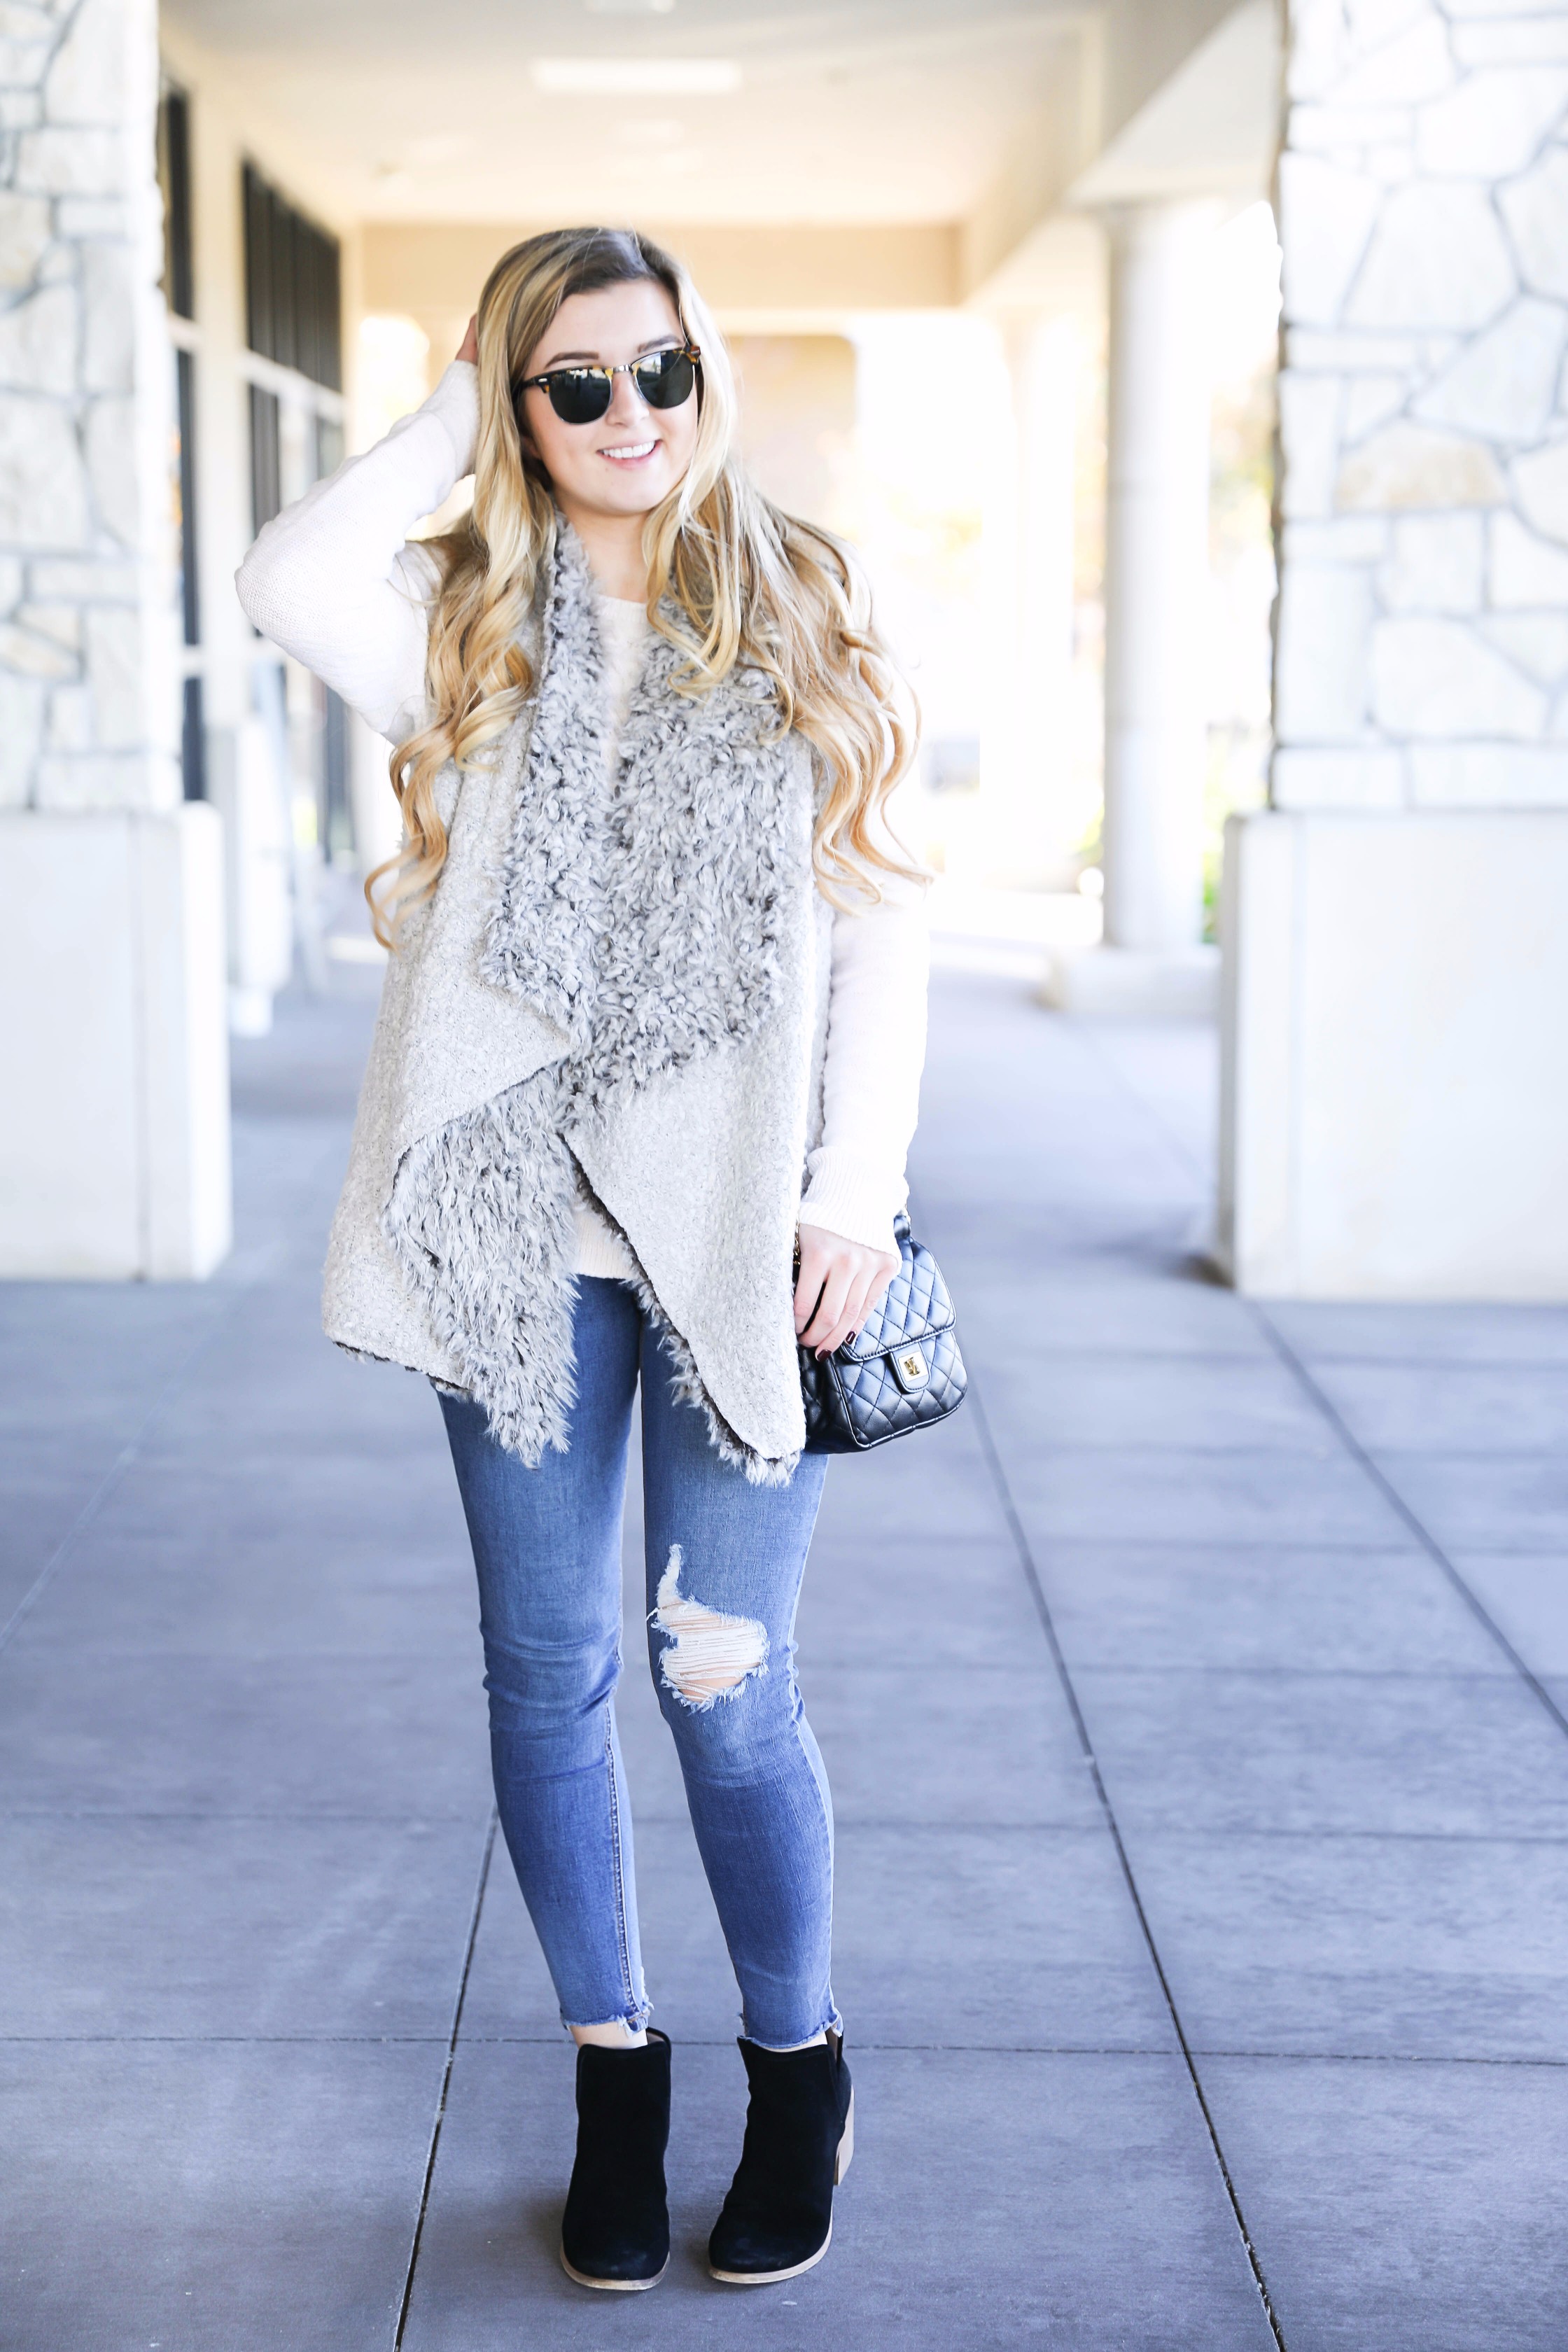 Thanksgiving Outfit Ideas on Fashion Blog Daily Dose of Charm by Lauren Lindmark